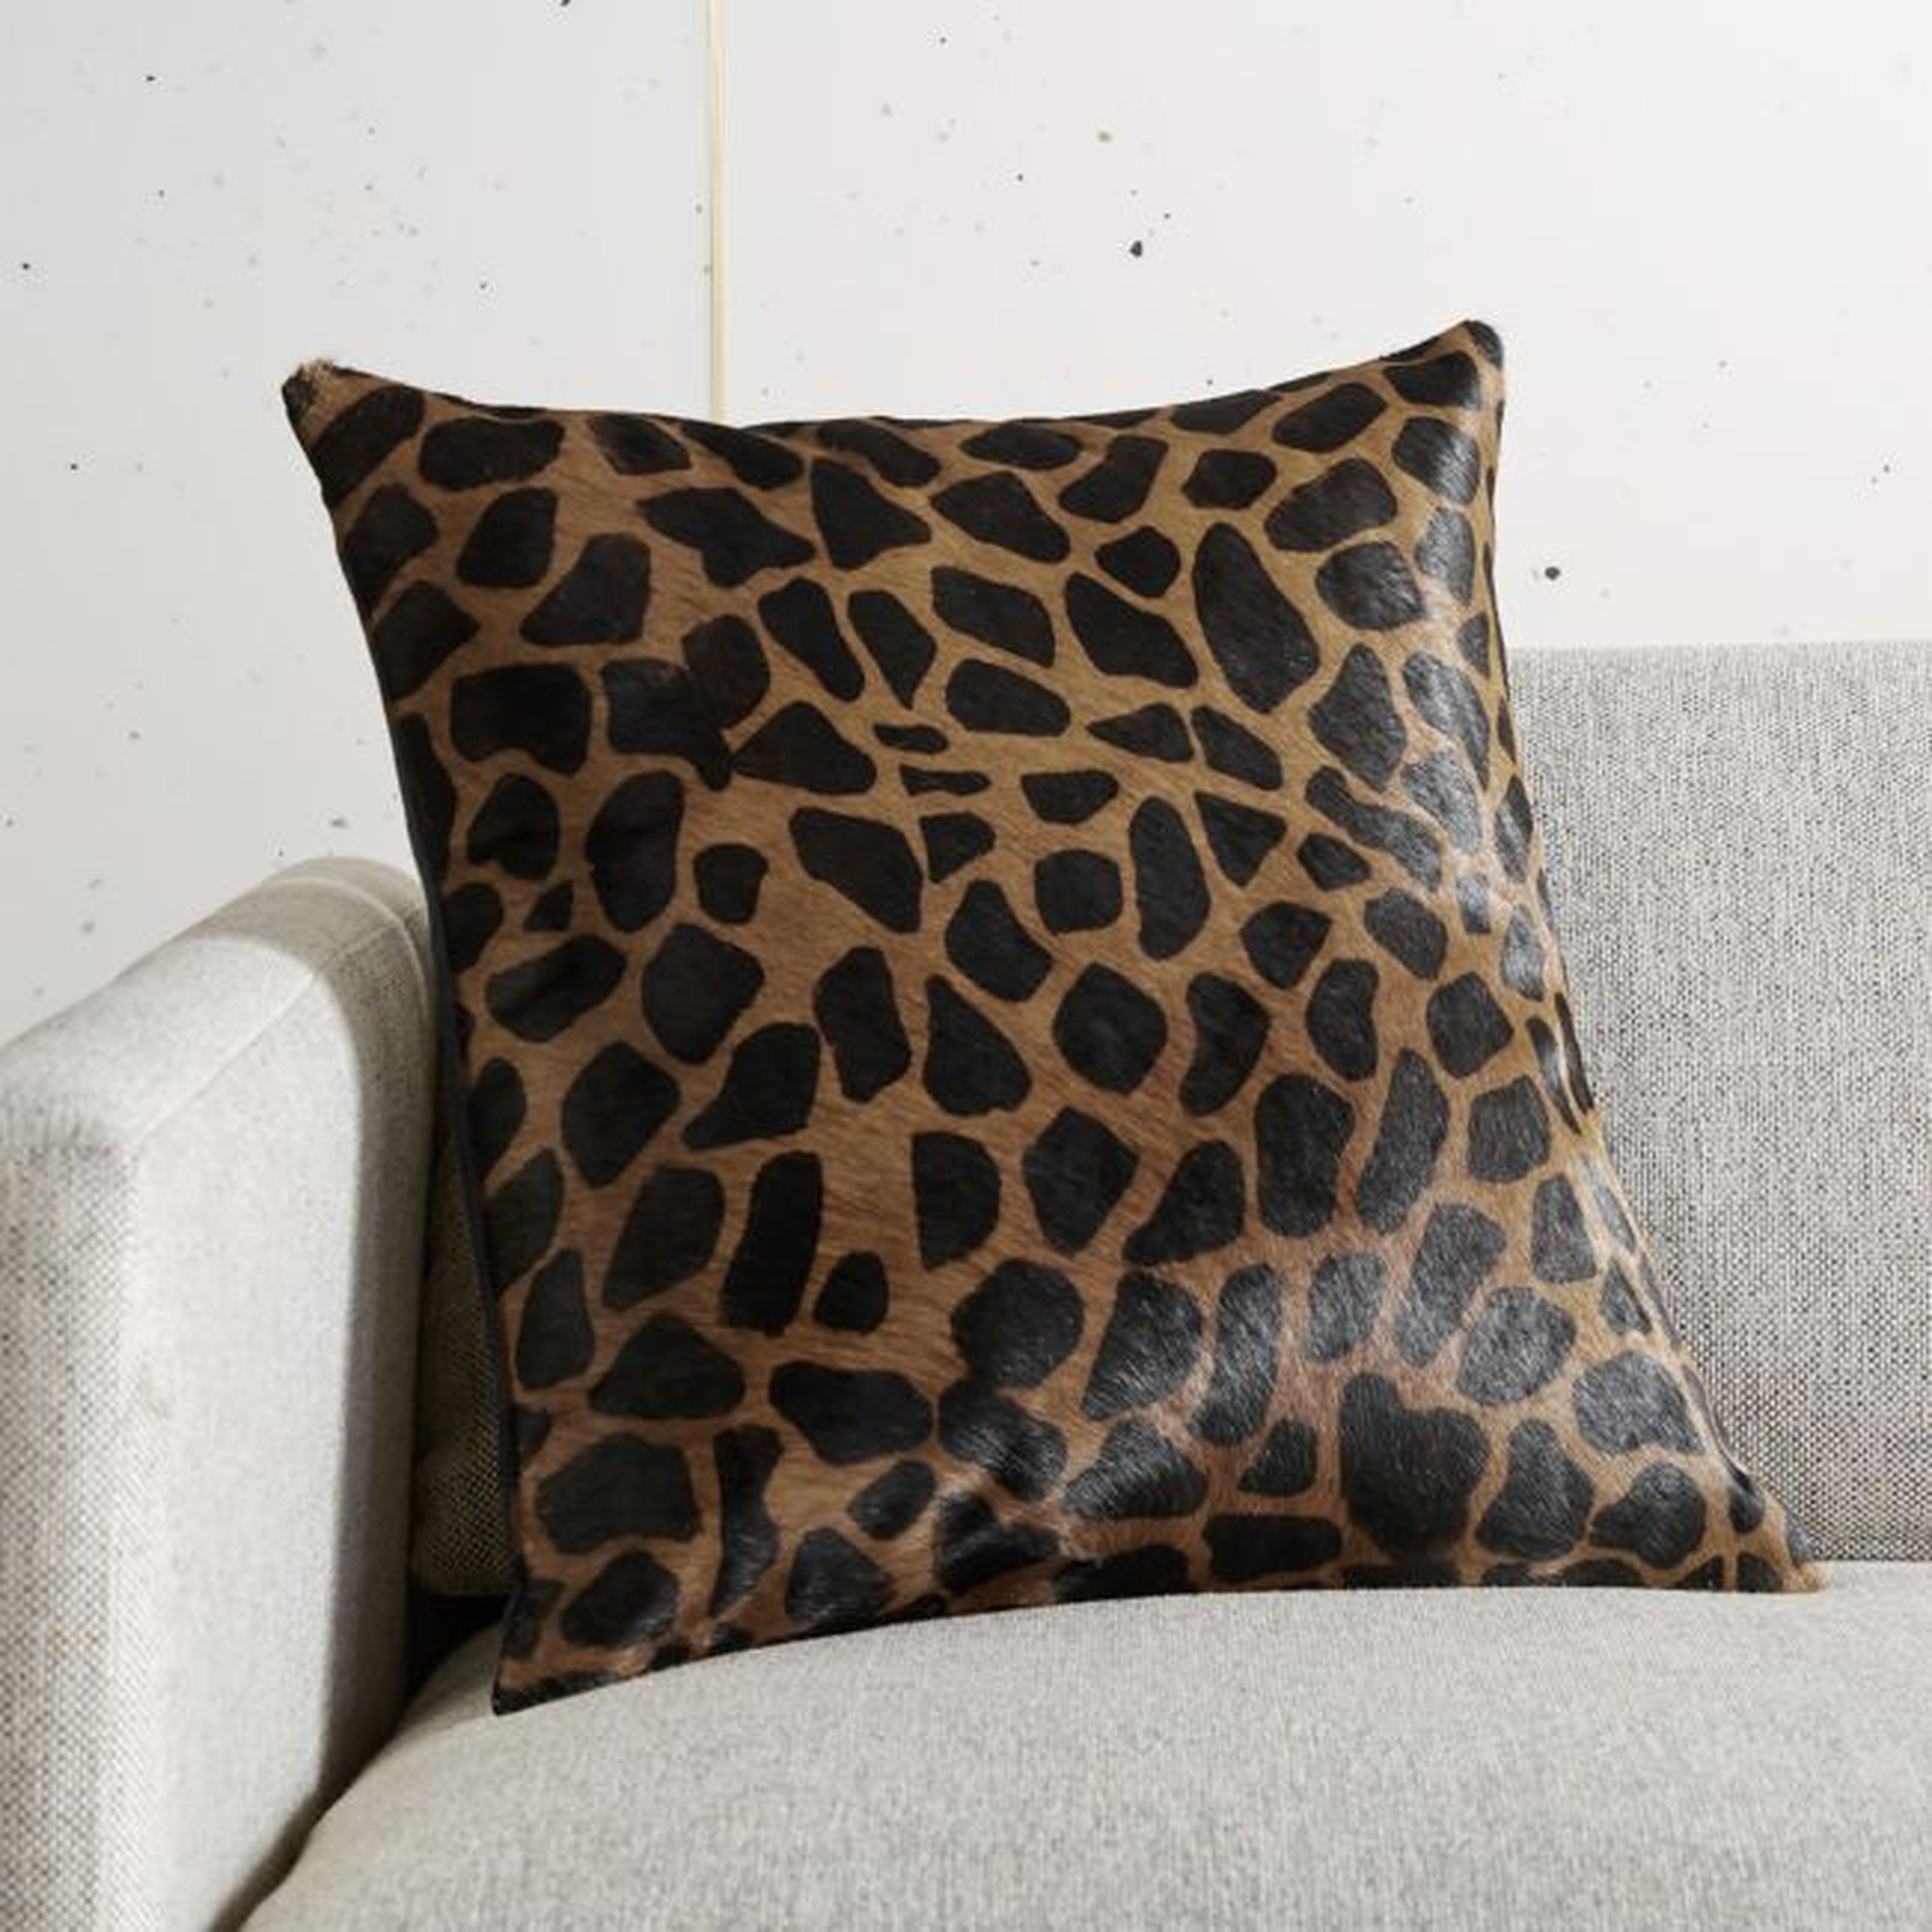 16" Masai Animal Print Pillow with Feather-Down Insert - CB2